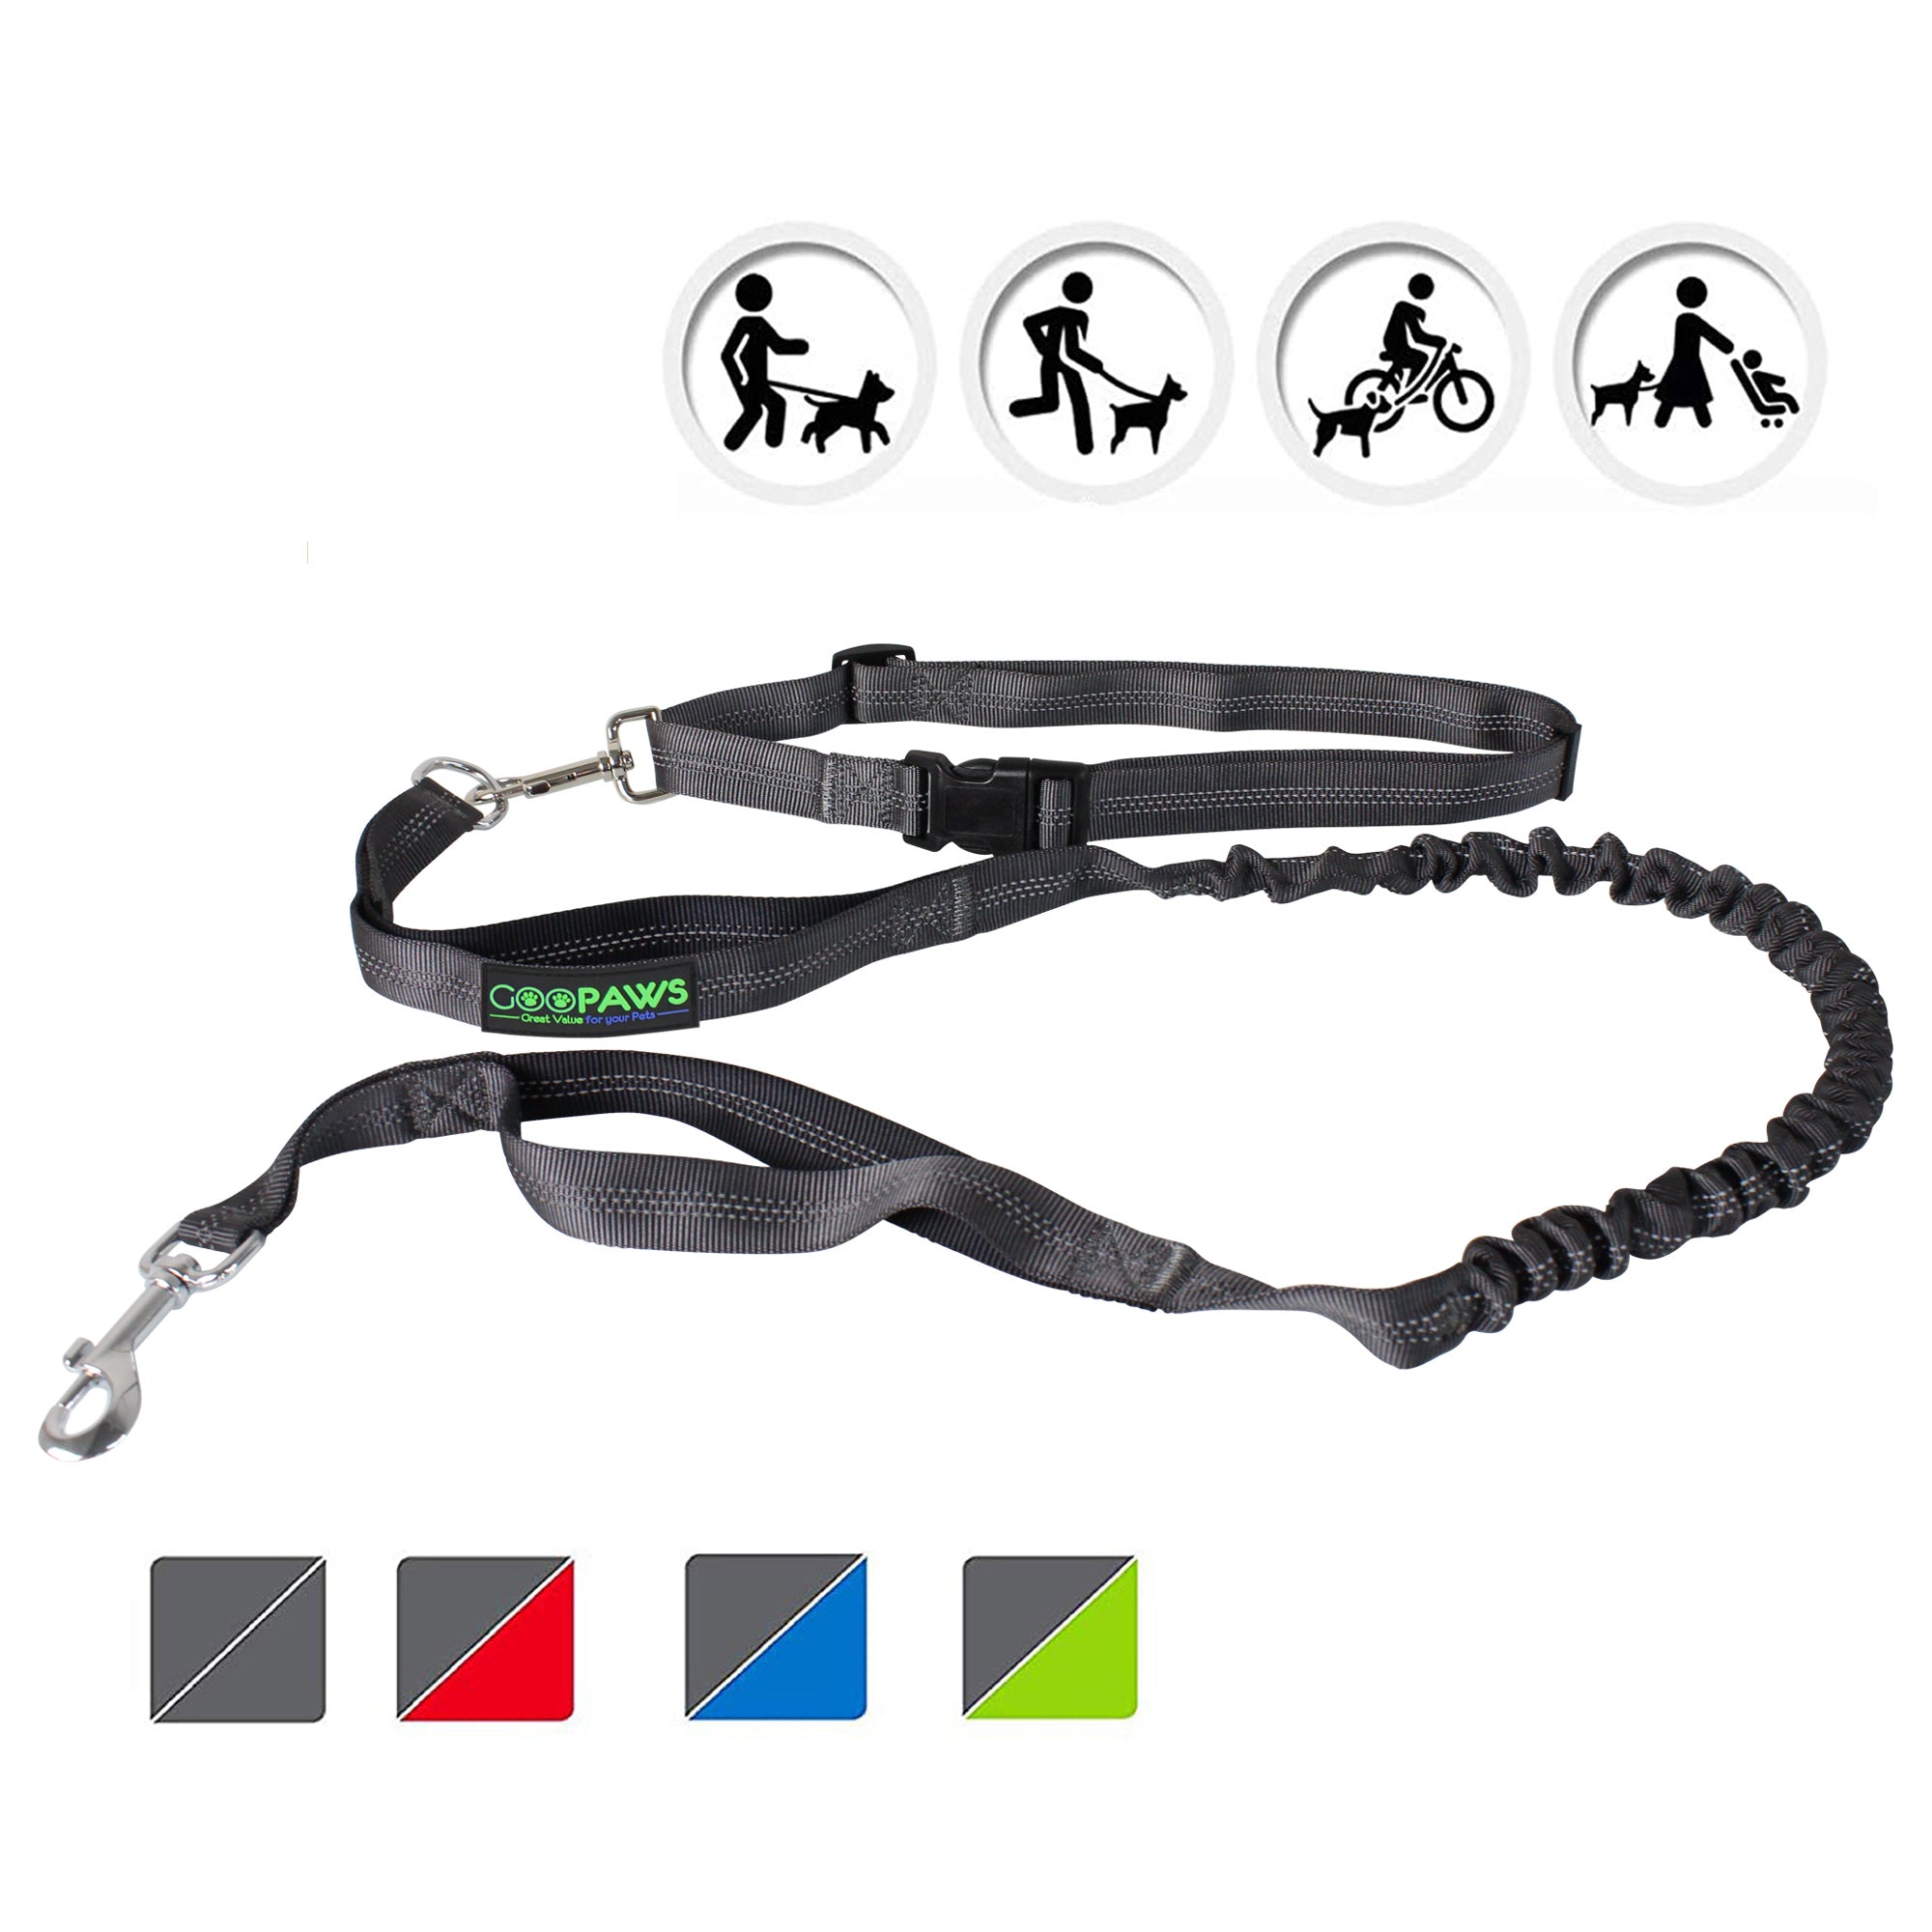 GOOPAWS No Pull Hand Free Bungee Dog Leash for Hiking, Running, Black